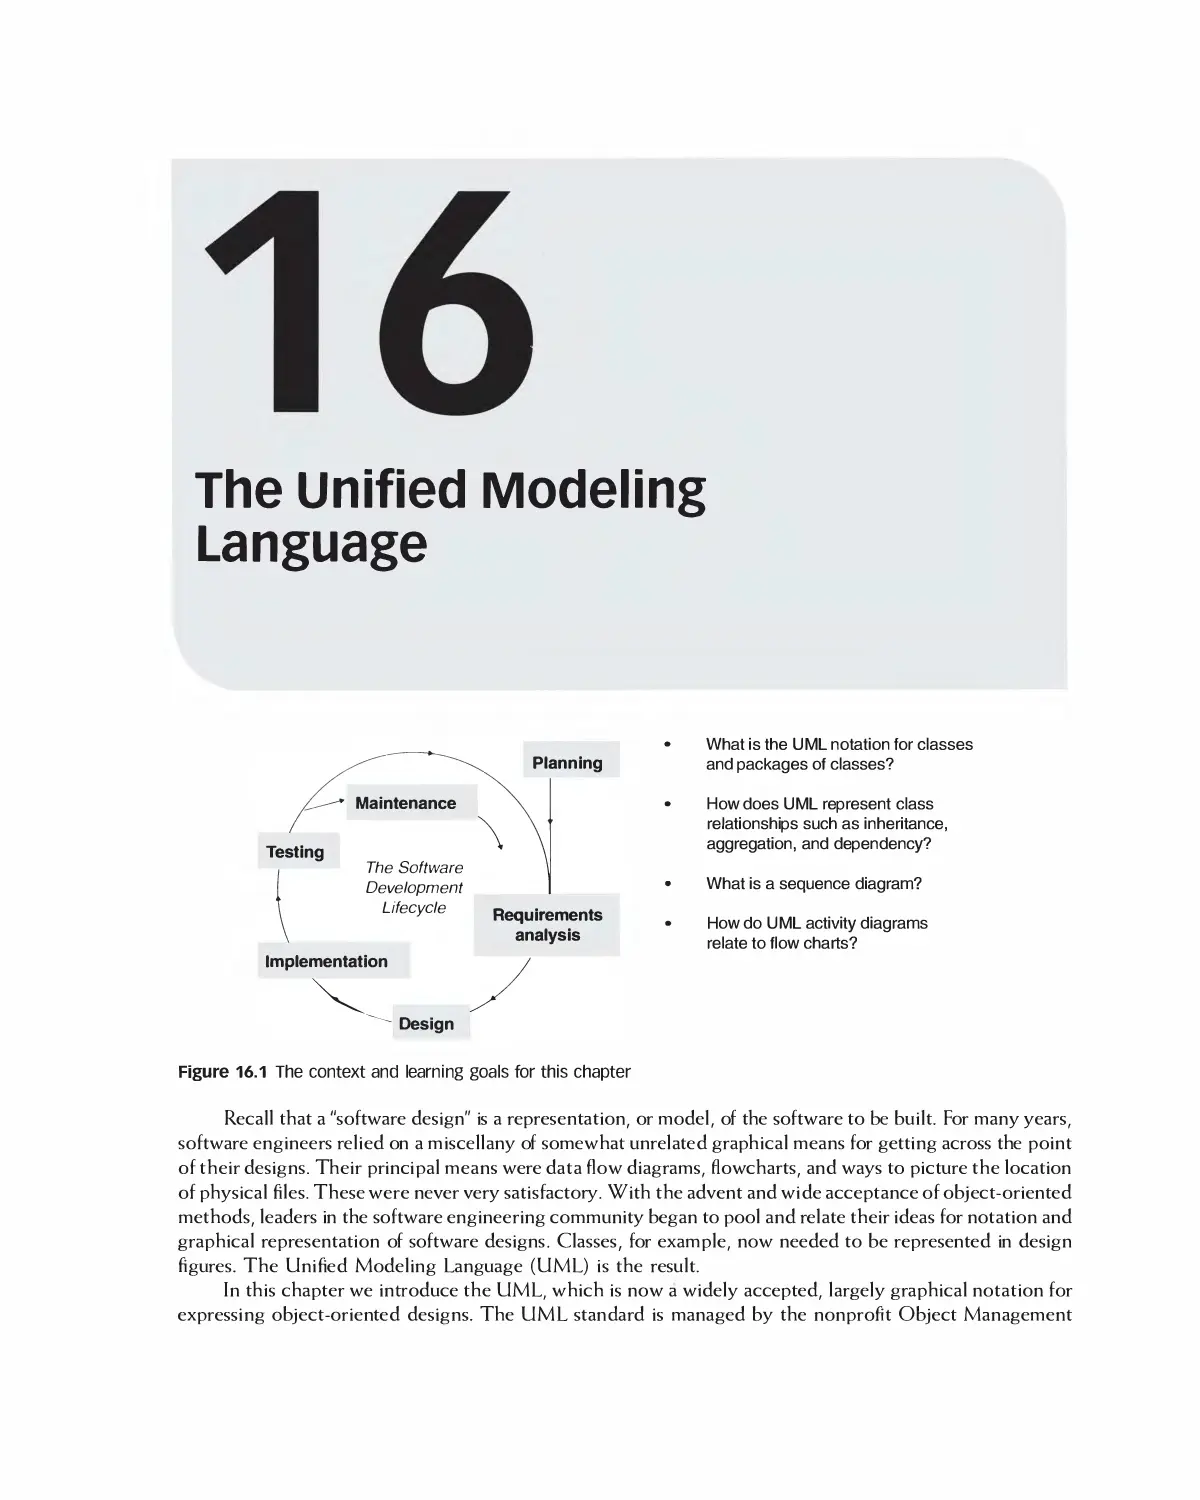 Chapter 16: The Unified Modeling Language